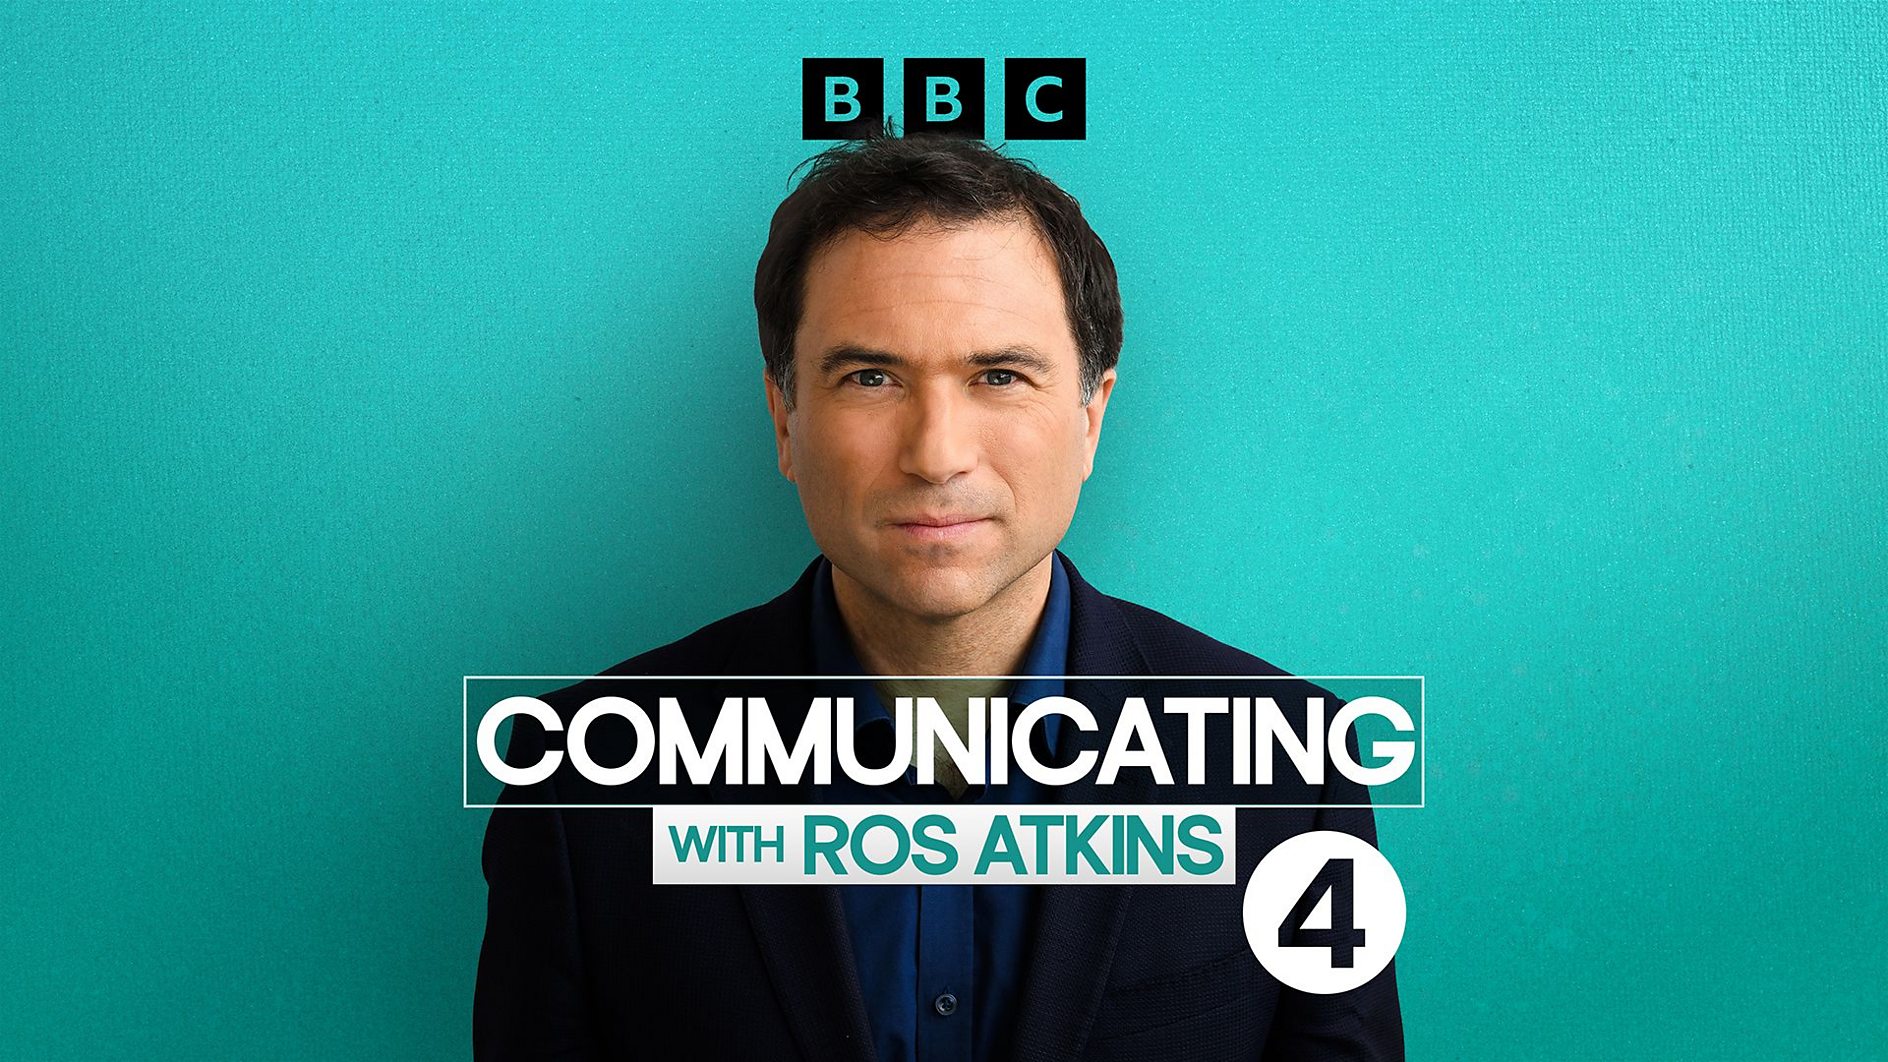 The art of communication to be explored in new BBC Radio 4 series presented by Ros Atkins